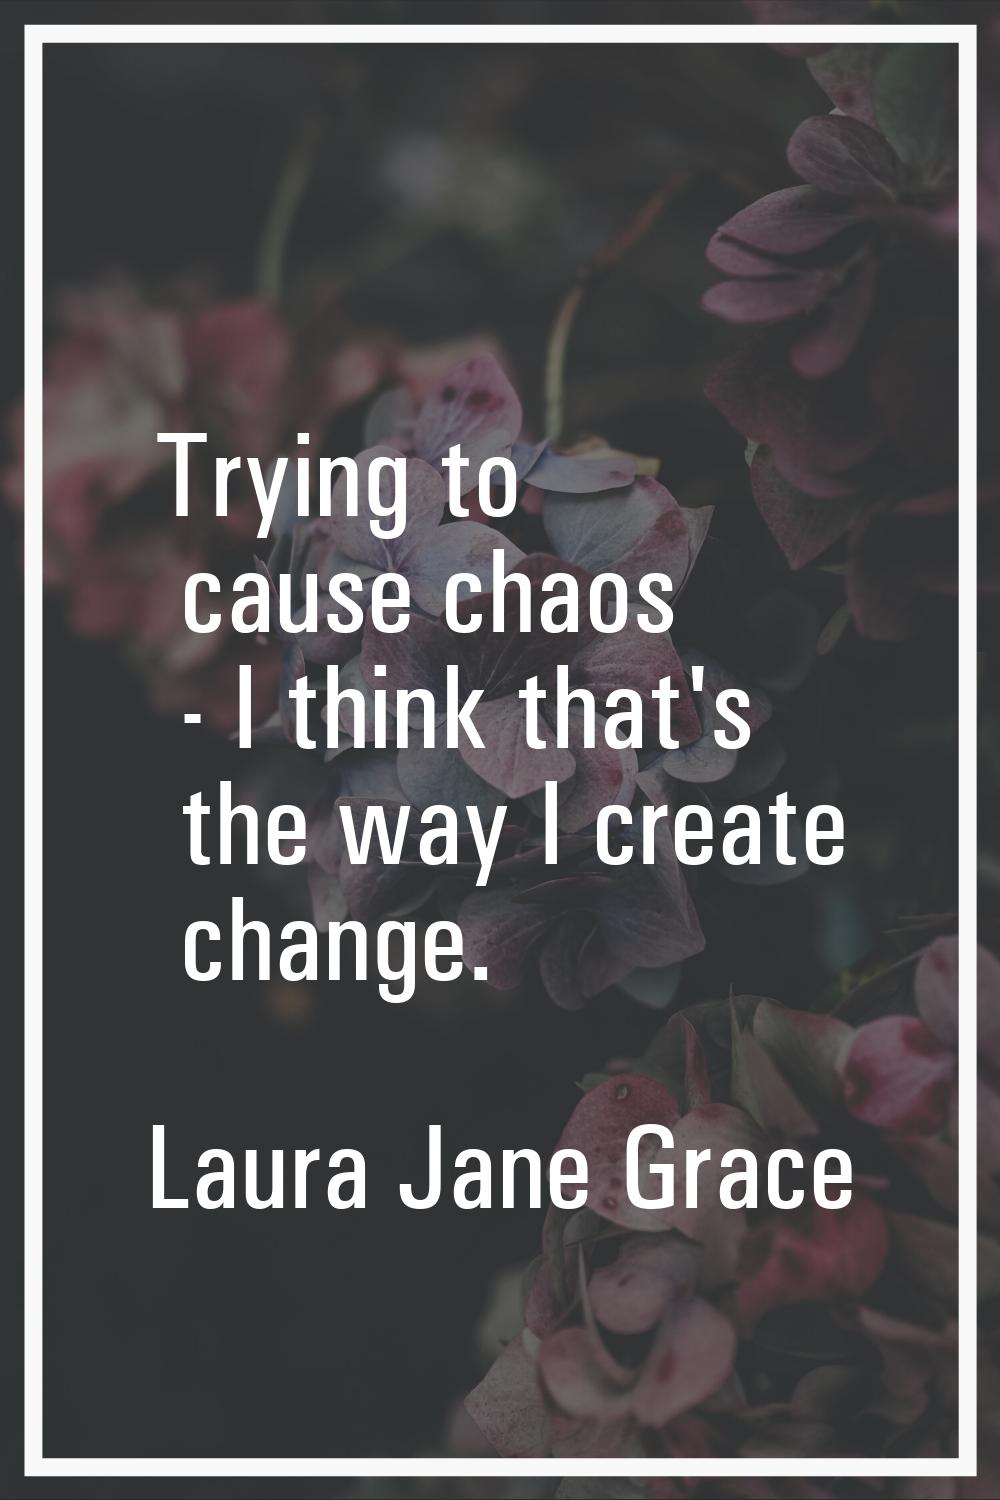 Trying to cause chaos - I think that's the way I create change.